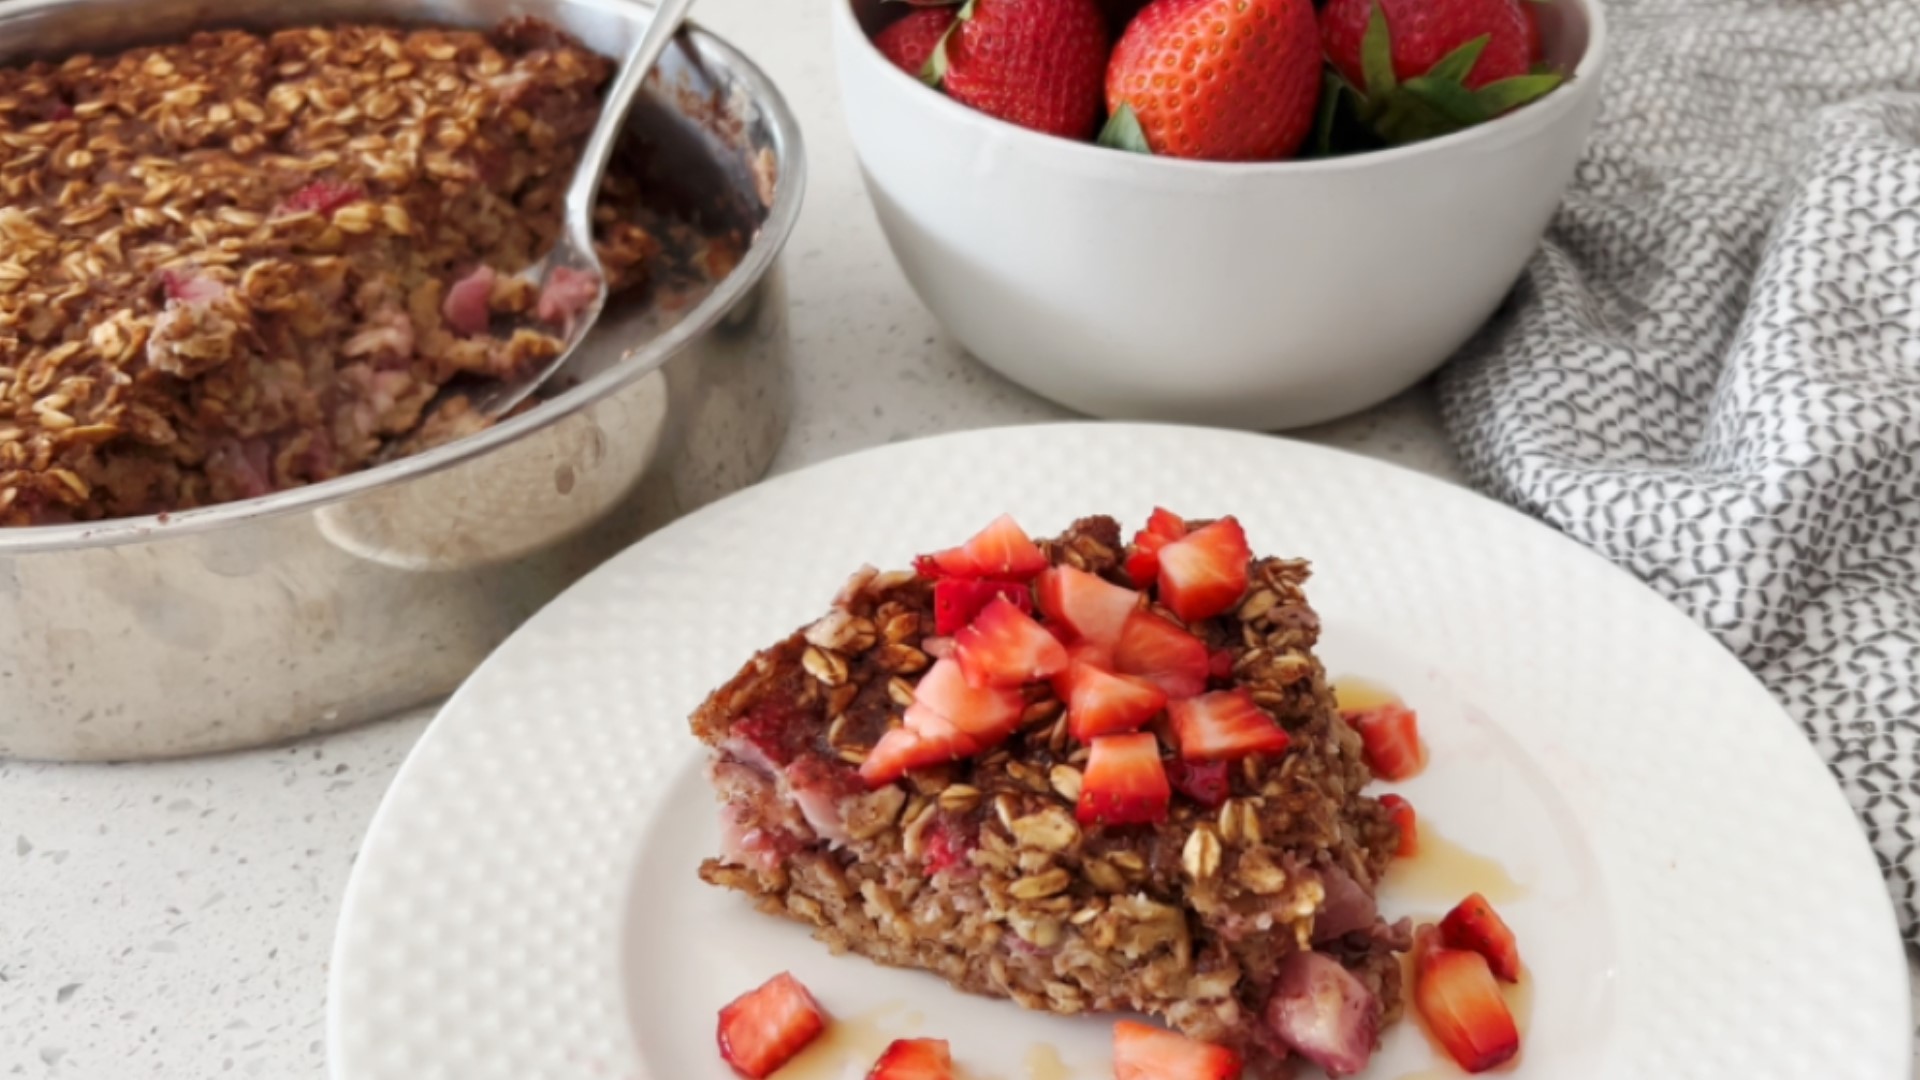 This Strawberry Baked Oatmeal makes a hearty breakfast that's easy to make!